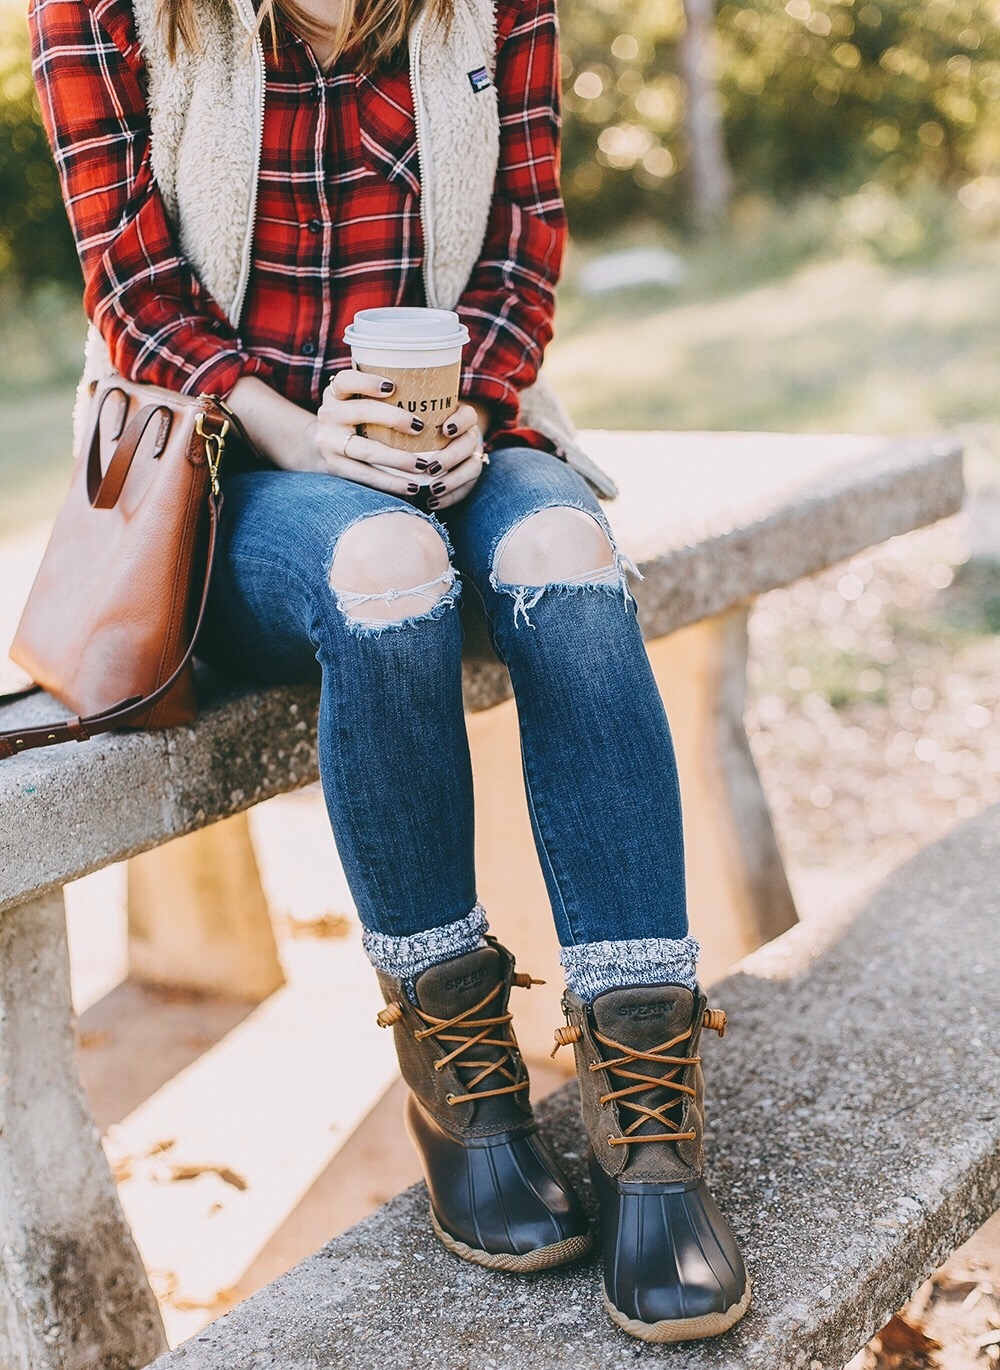 sperry duck boots outfit ideas